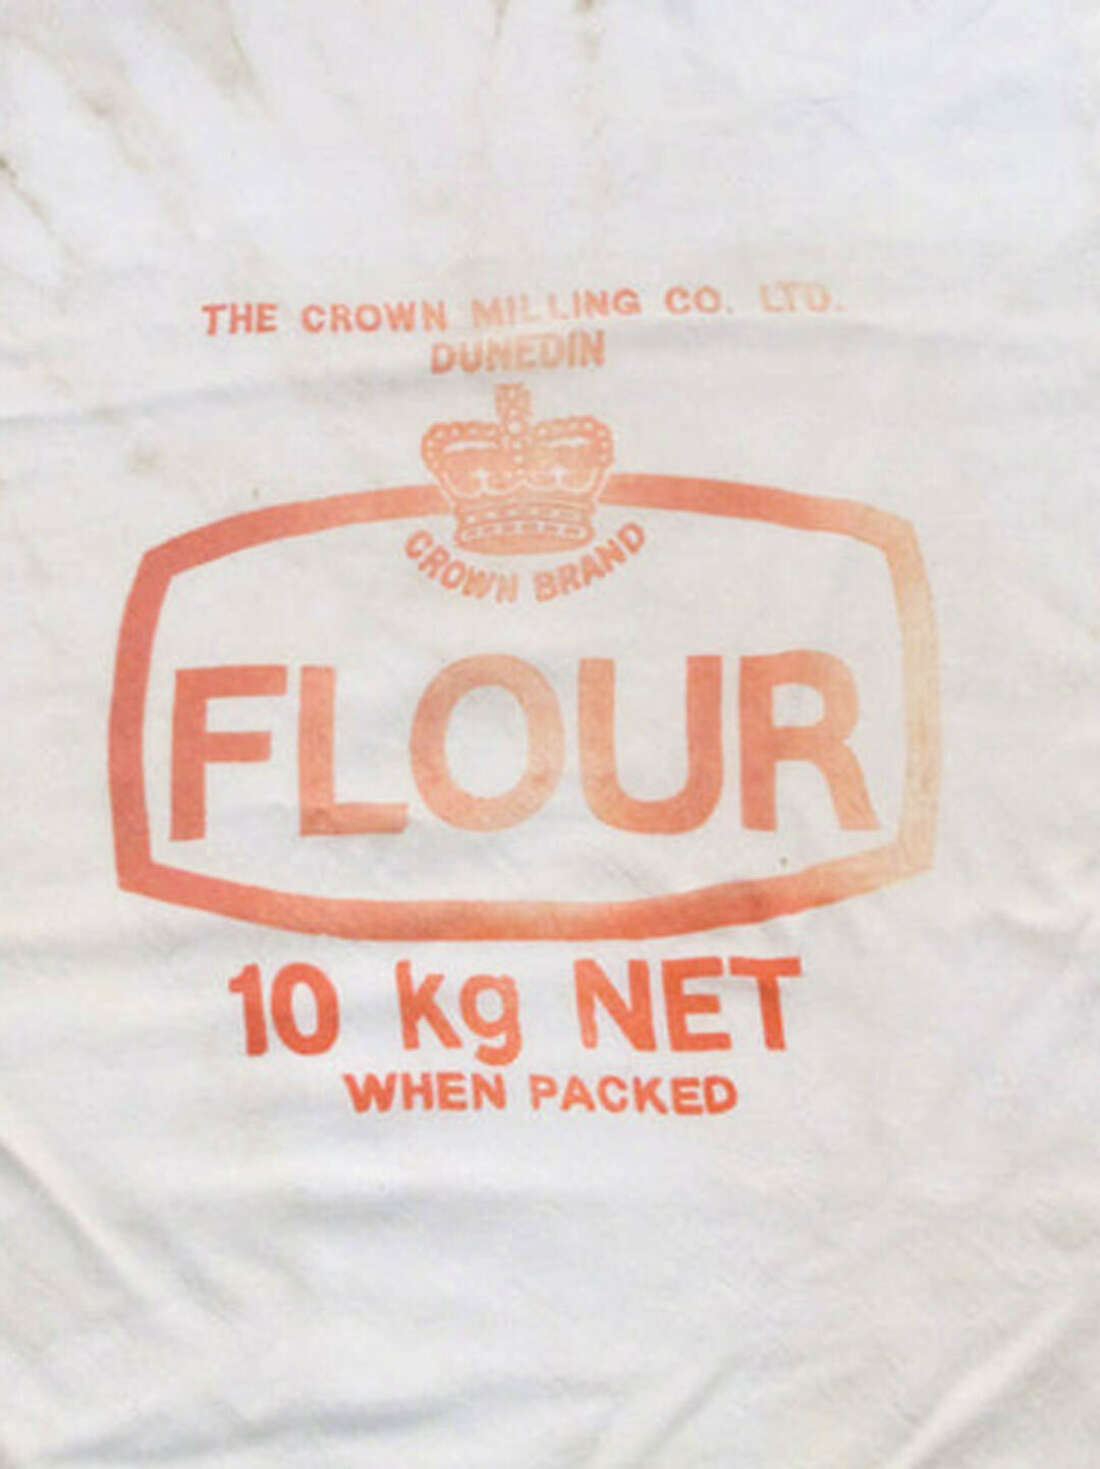 I once had an office in a flour mill.